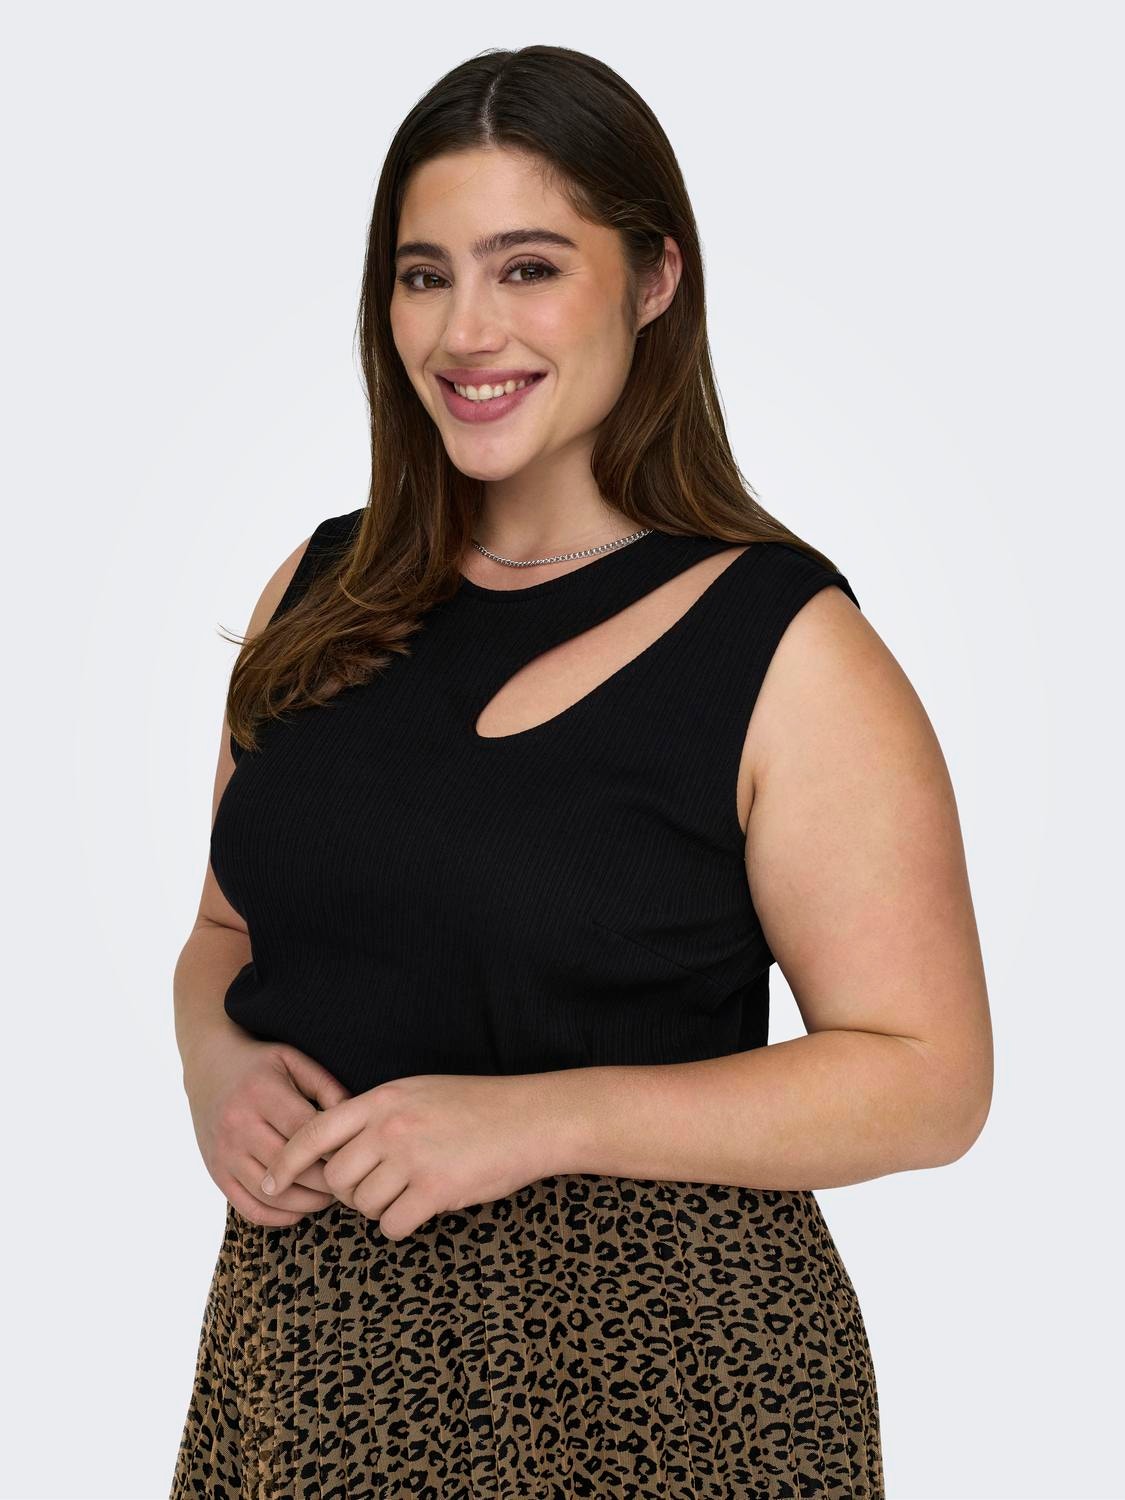 ONLY Curvy cut-out top -Black - 15312371